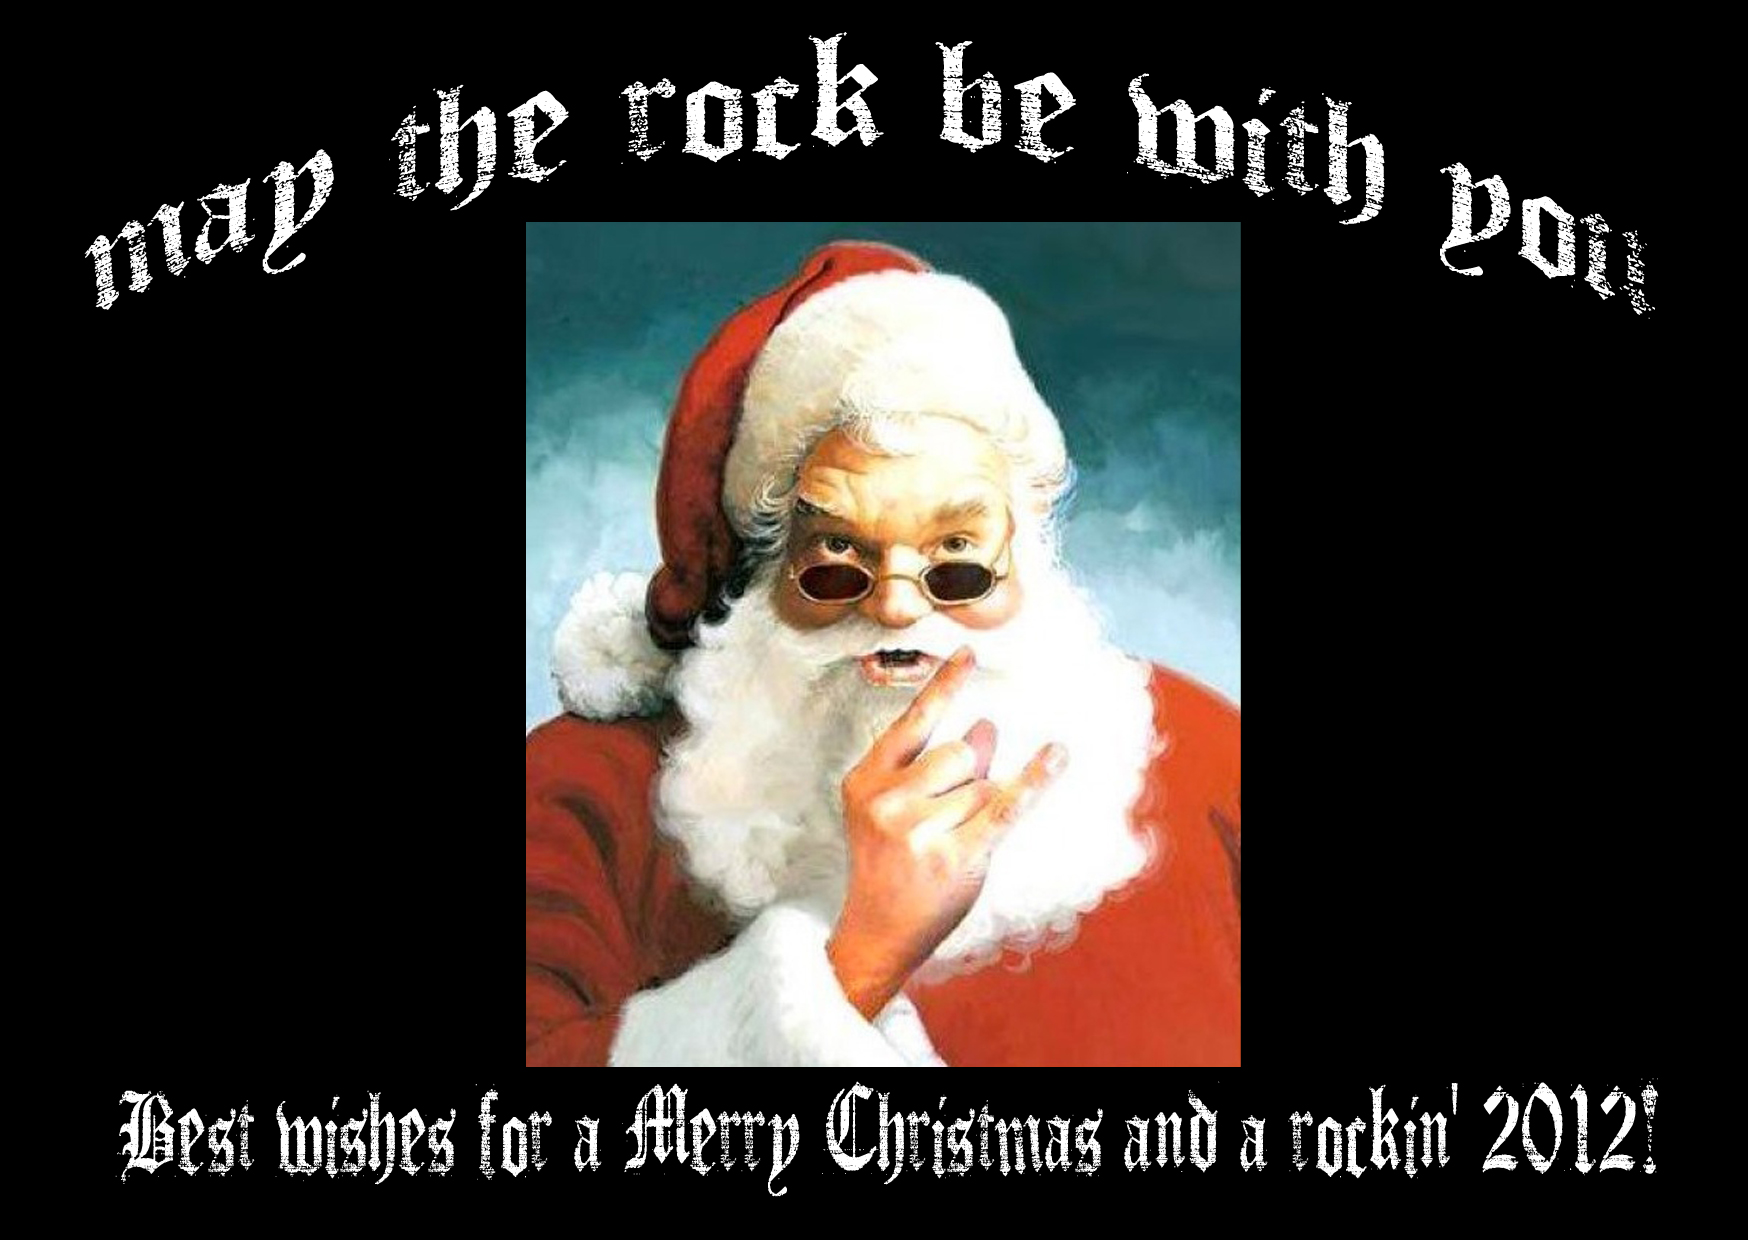 Merry Christmas and Best Wishes for 2012!